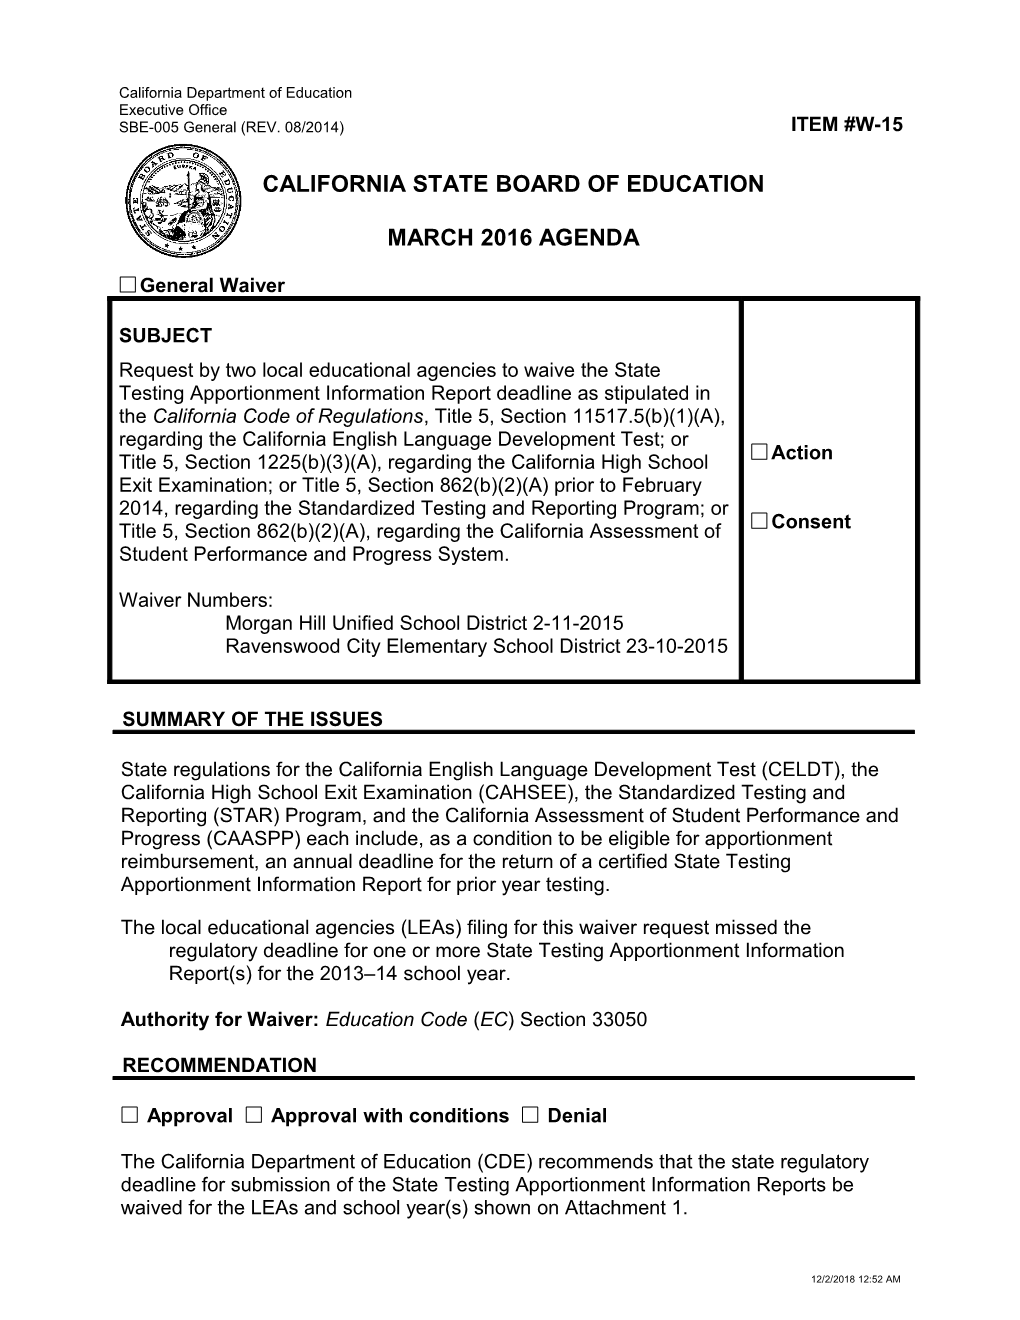 March 2016 Waiver Item W-15 - Meeting Agendas (CA State Board of Education)